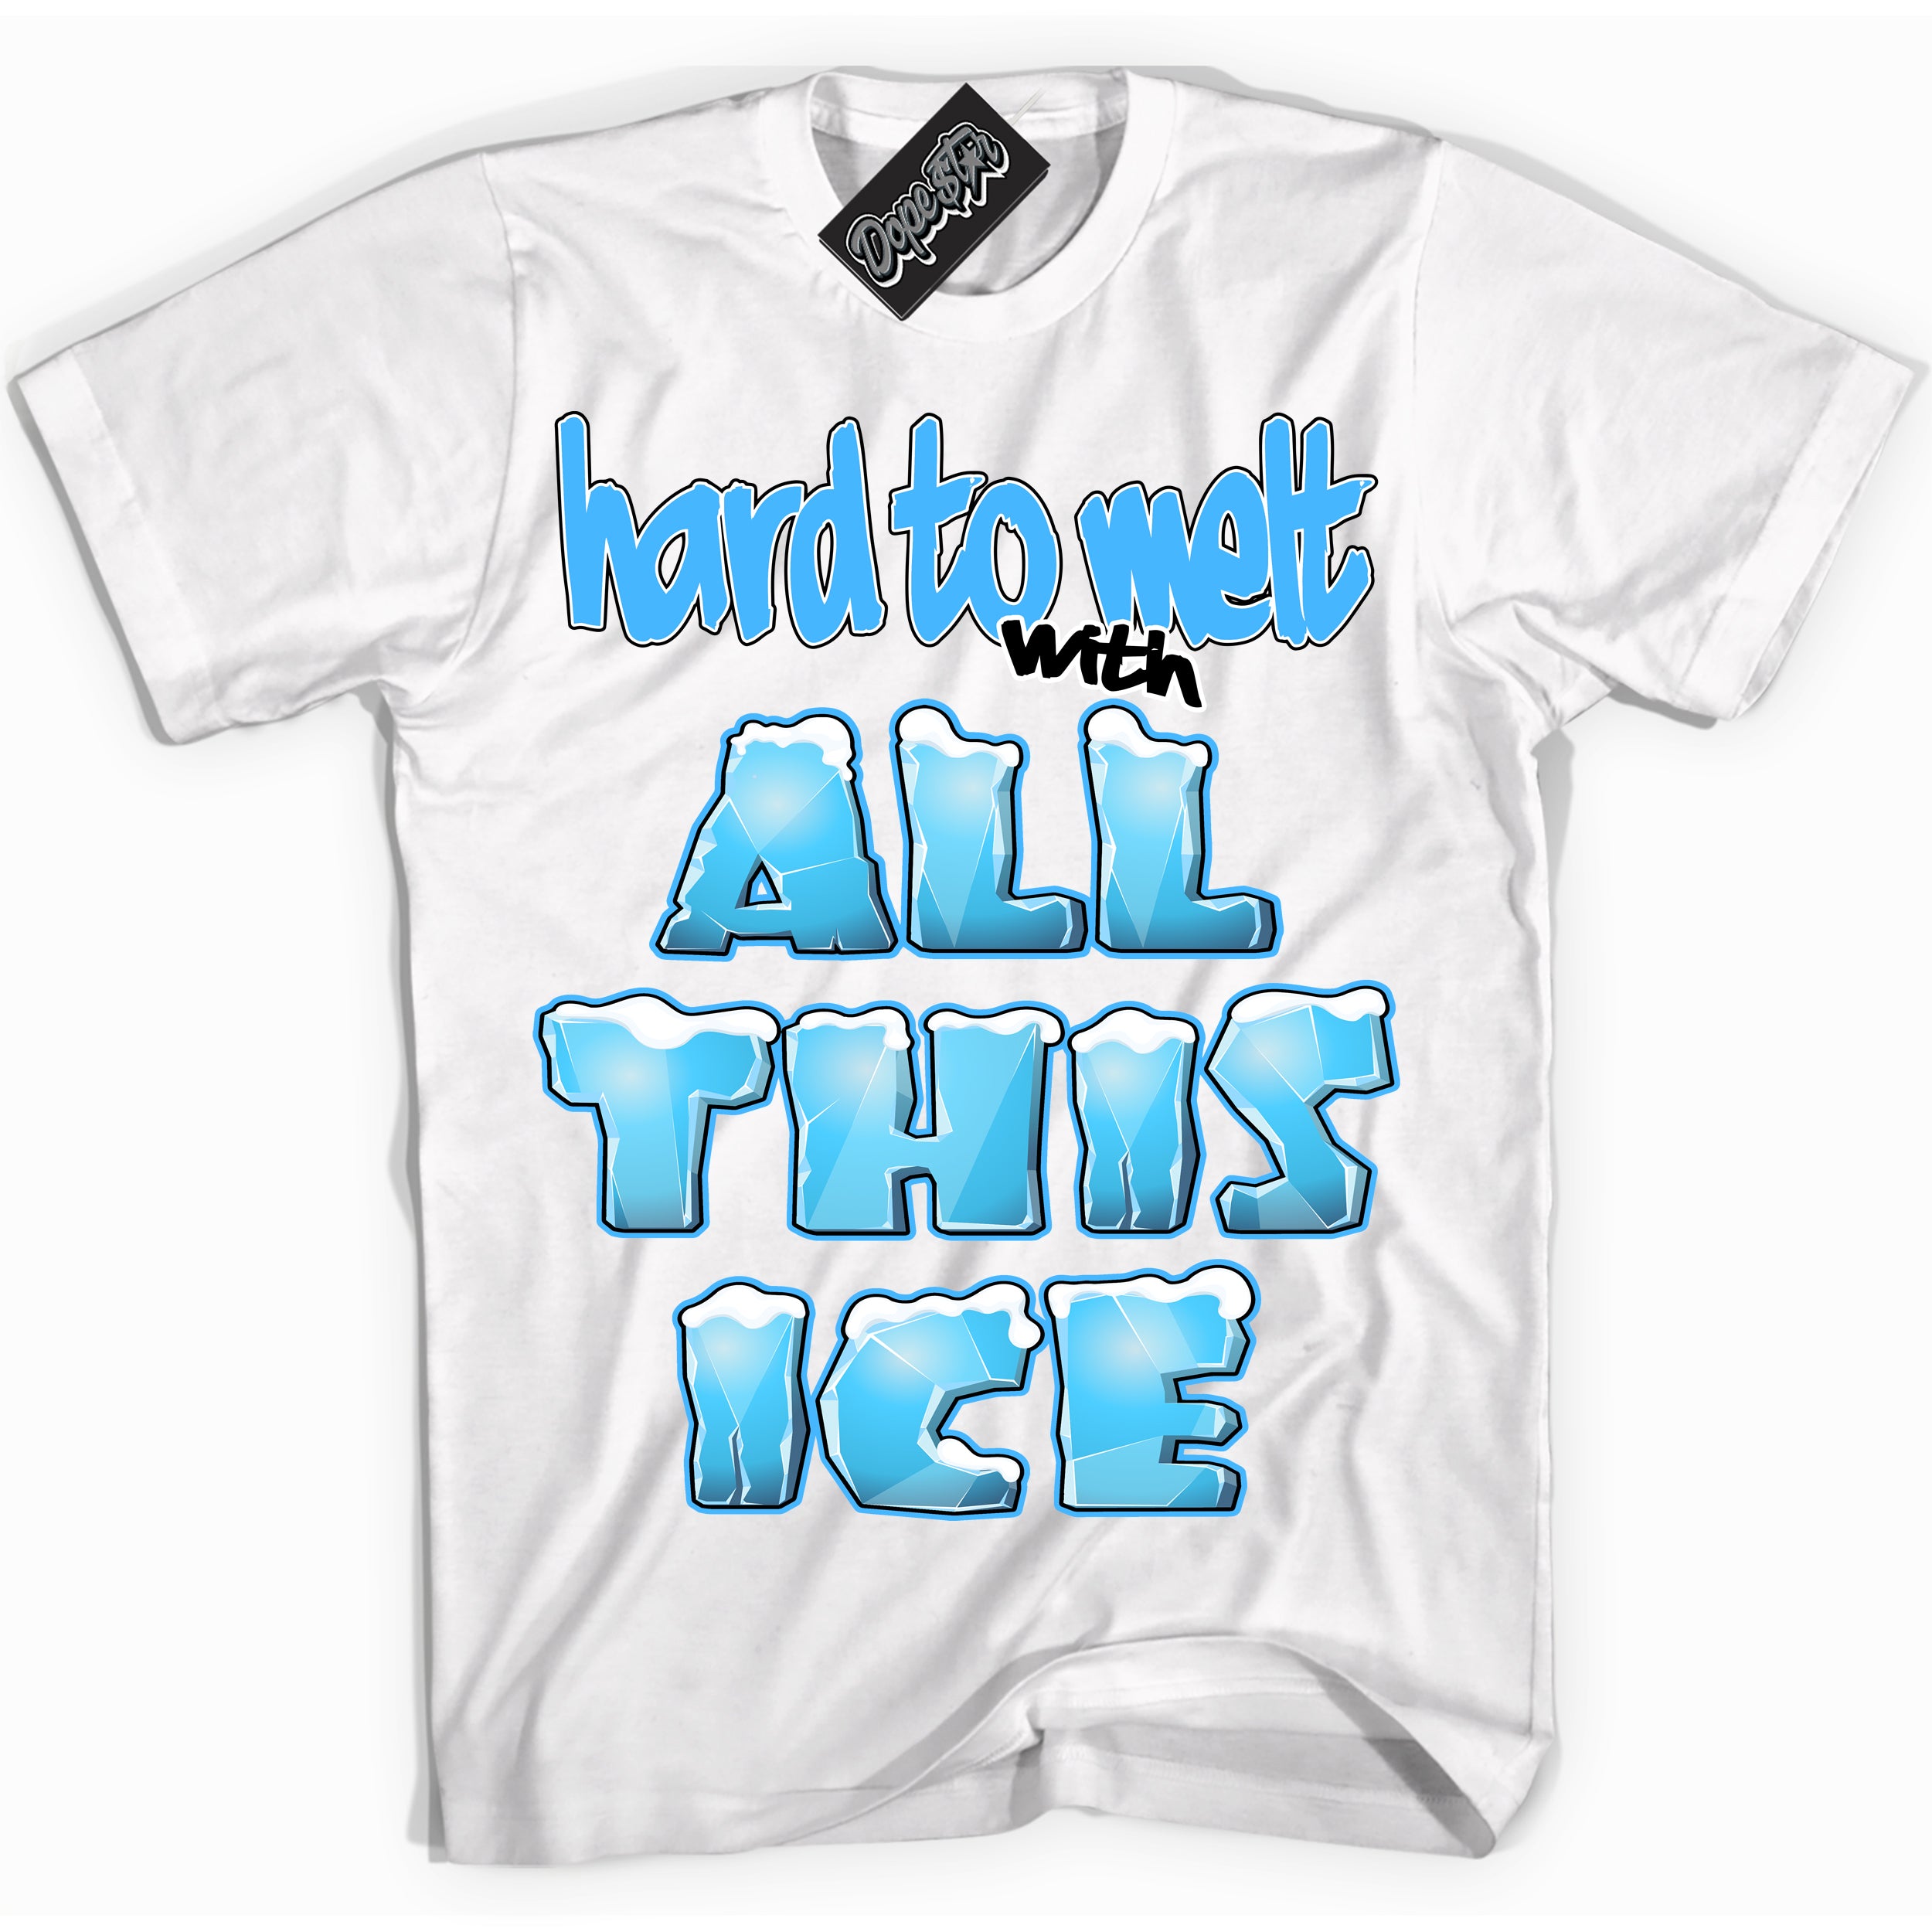 Cool White graphic tee with “ All This Ice ” design, that perfectly matches Powder Blue 9s sneakers 